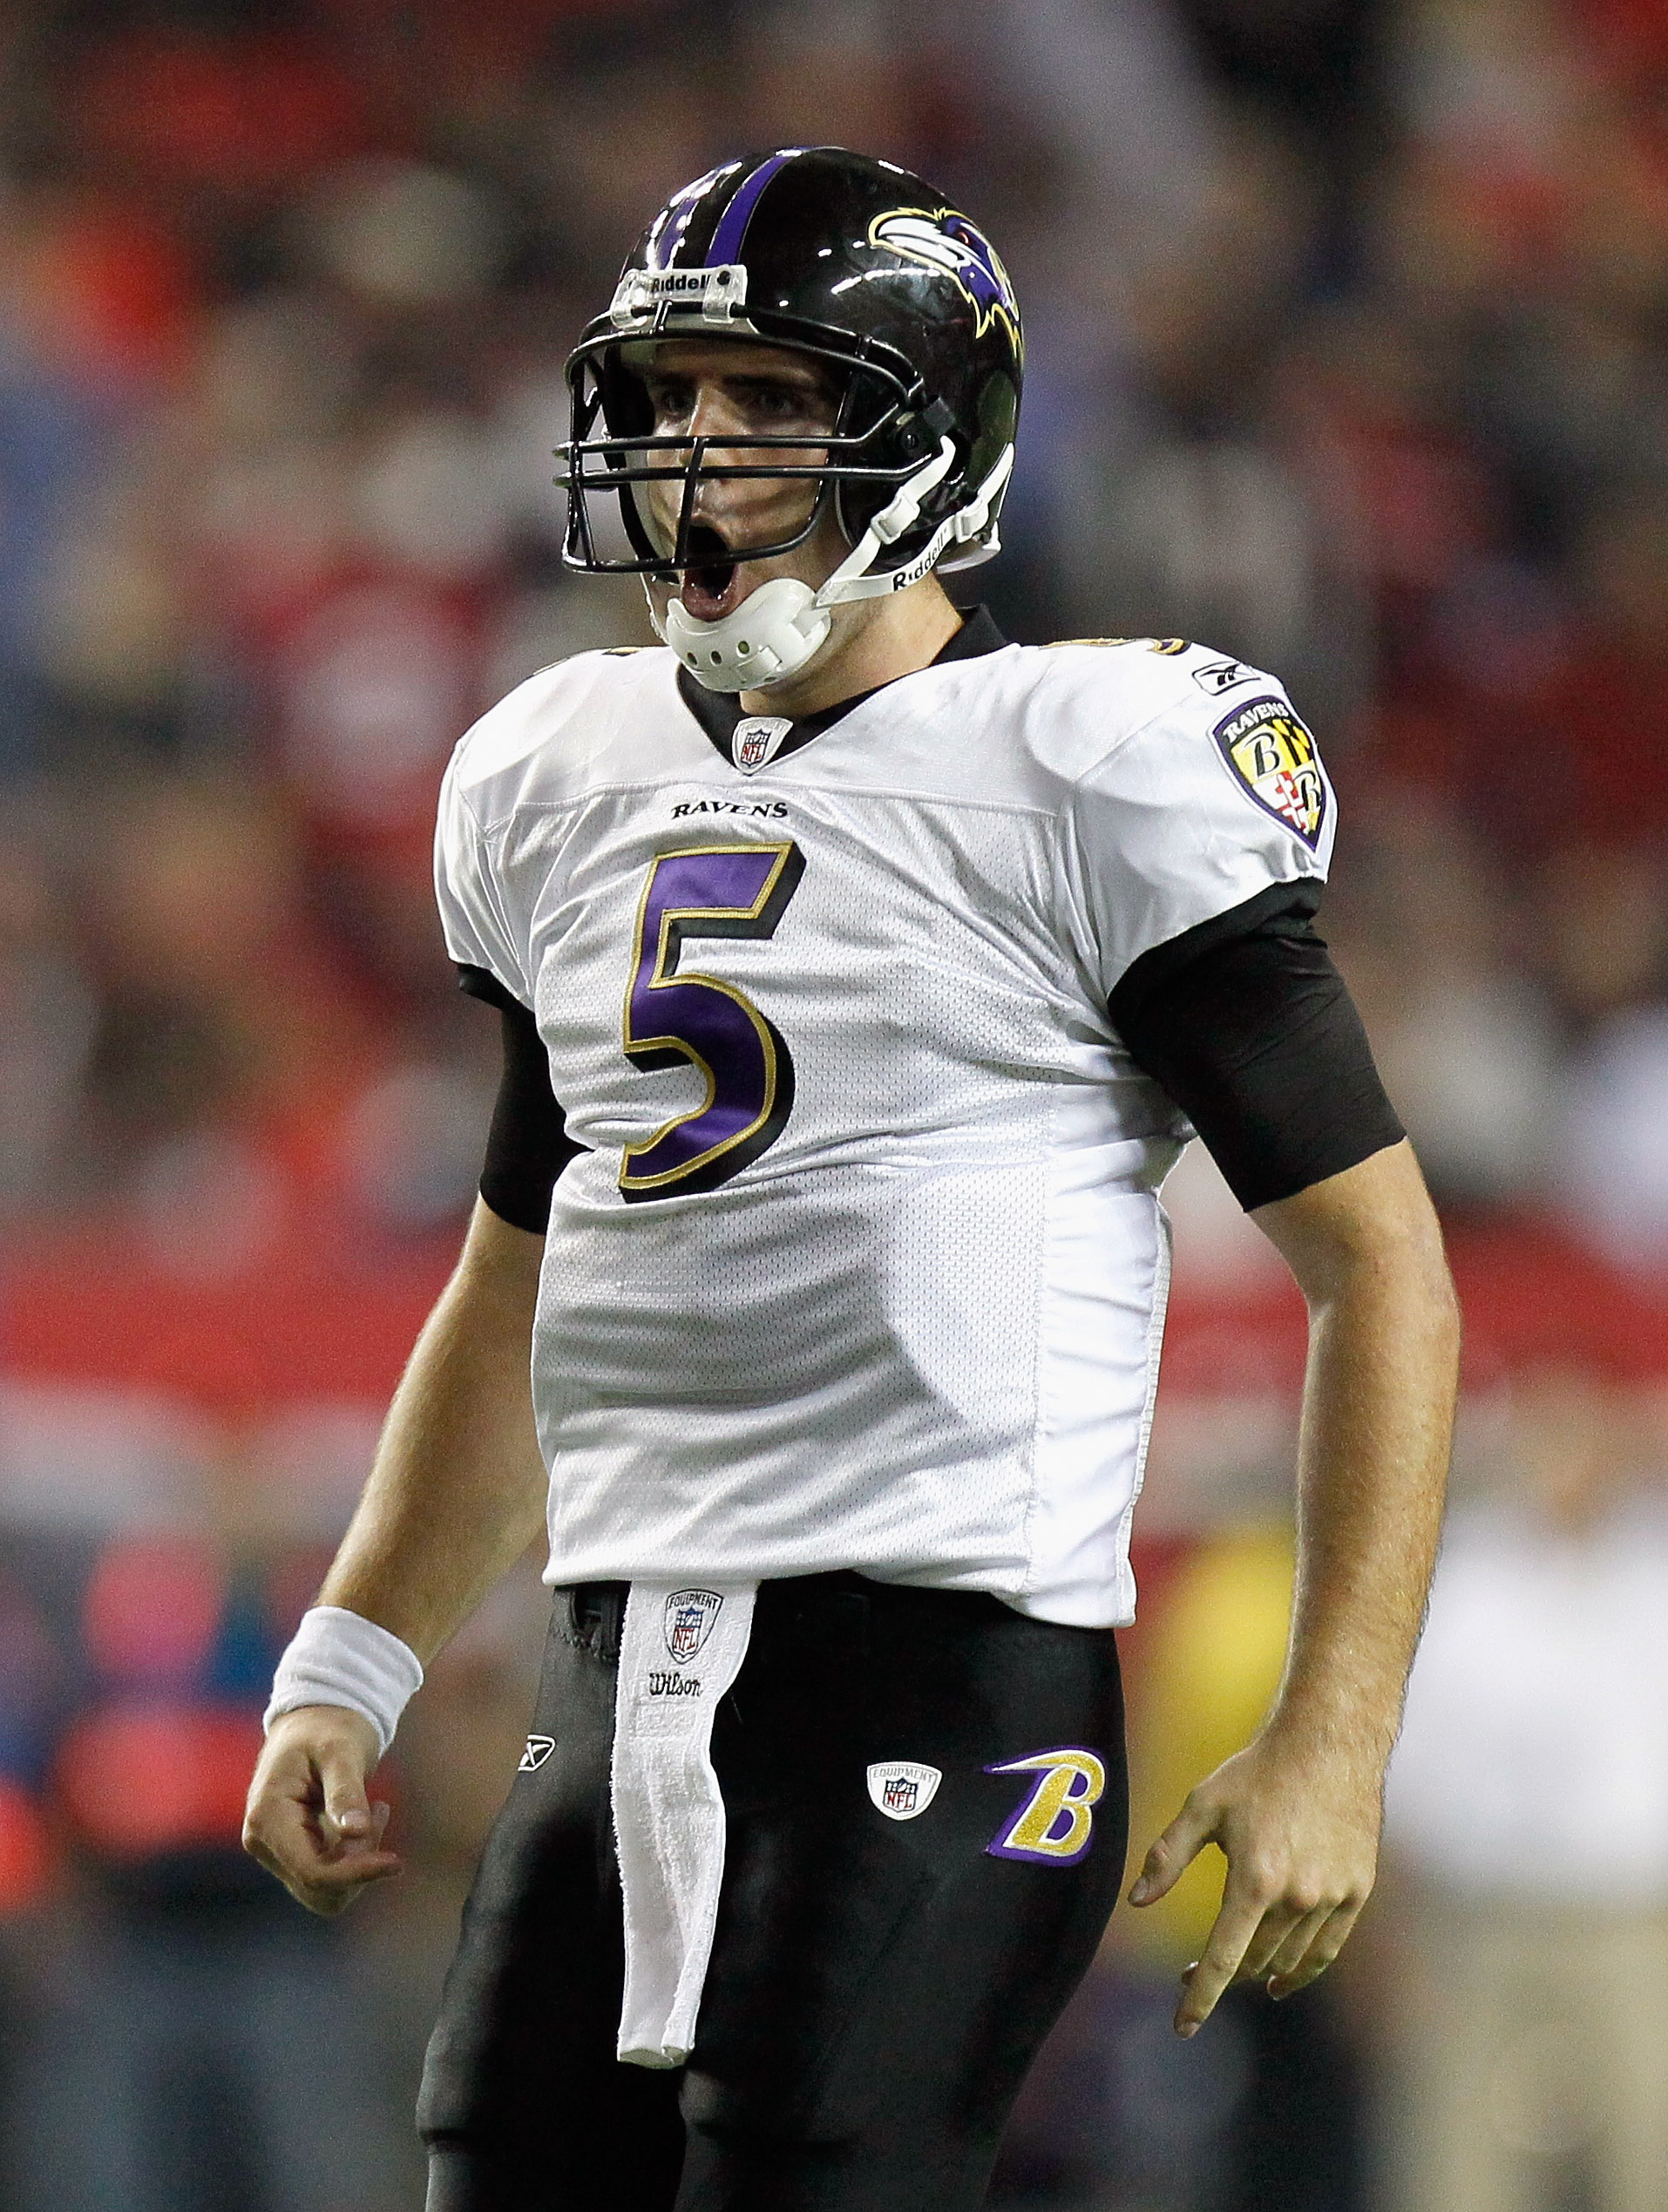 ATLANTA - NOVEMBER 11:  Quarterback Joe Flacco #5 of the Baltimore Ravens reacts after tossing a touchdown reception against the Atlanta Falcons at Georgia Dome on November 11, 2010 in Atlanta, Georgia.  (Photo by Kevin C. Cox/Getty Images)